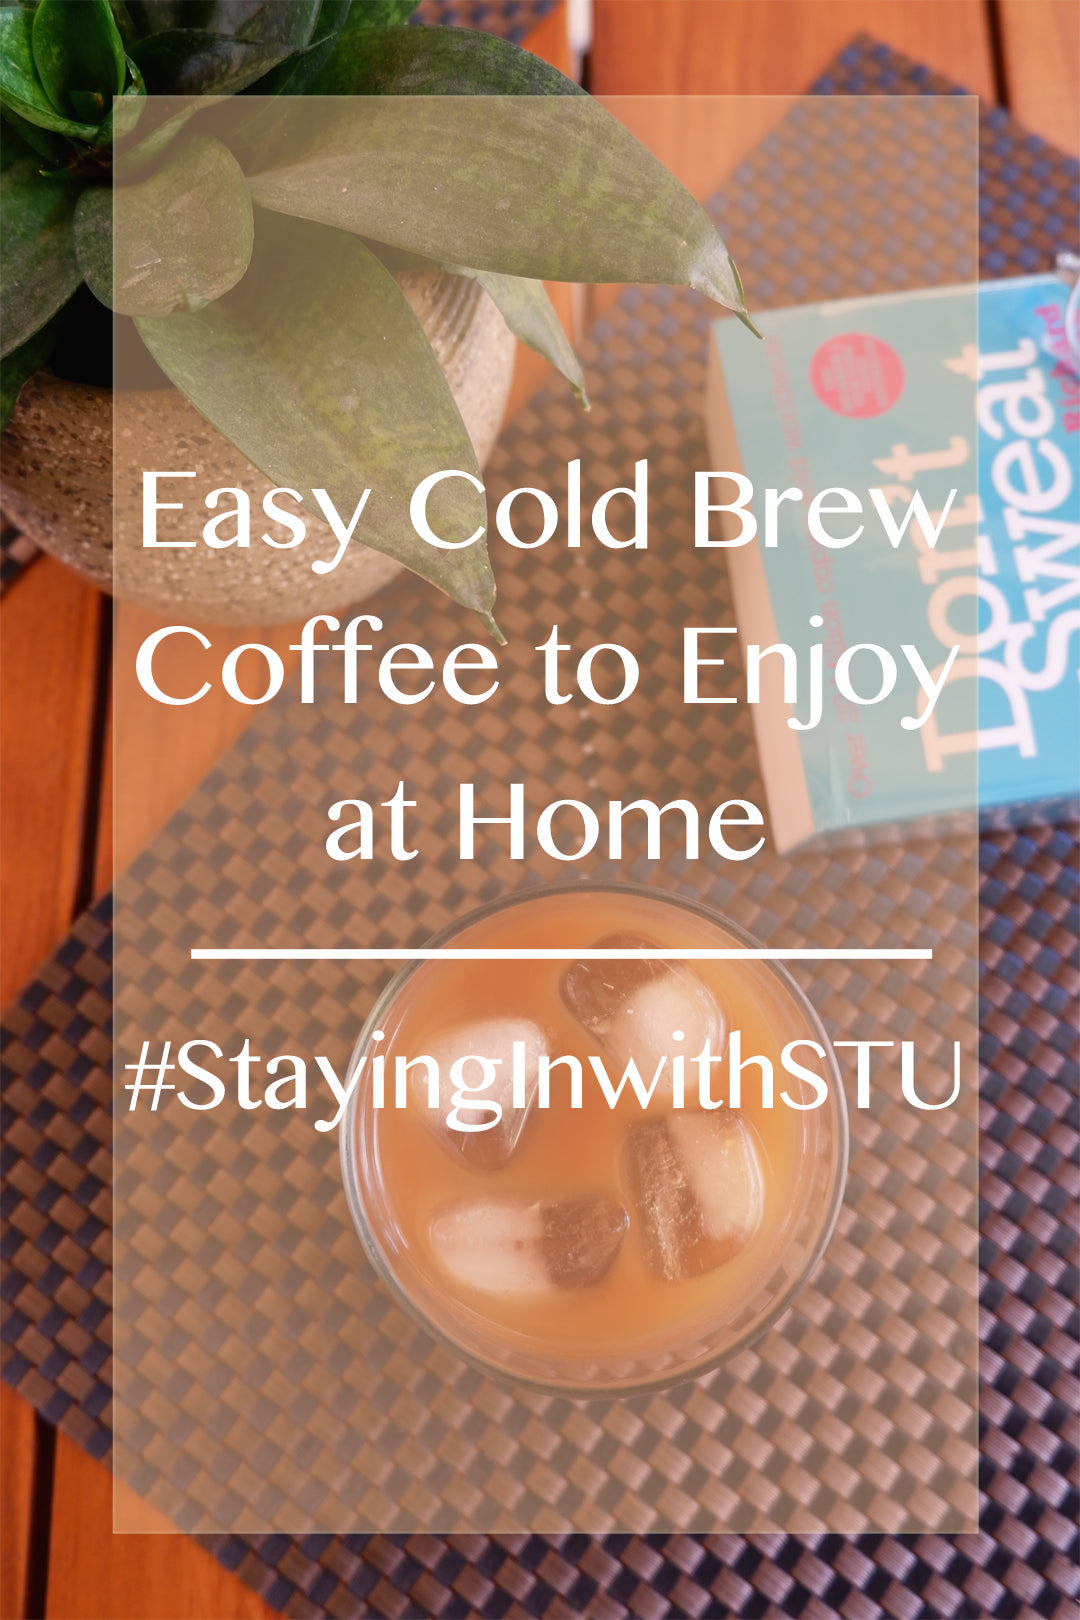 Easy Cold Brew Coffee to Enjoy at Home